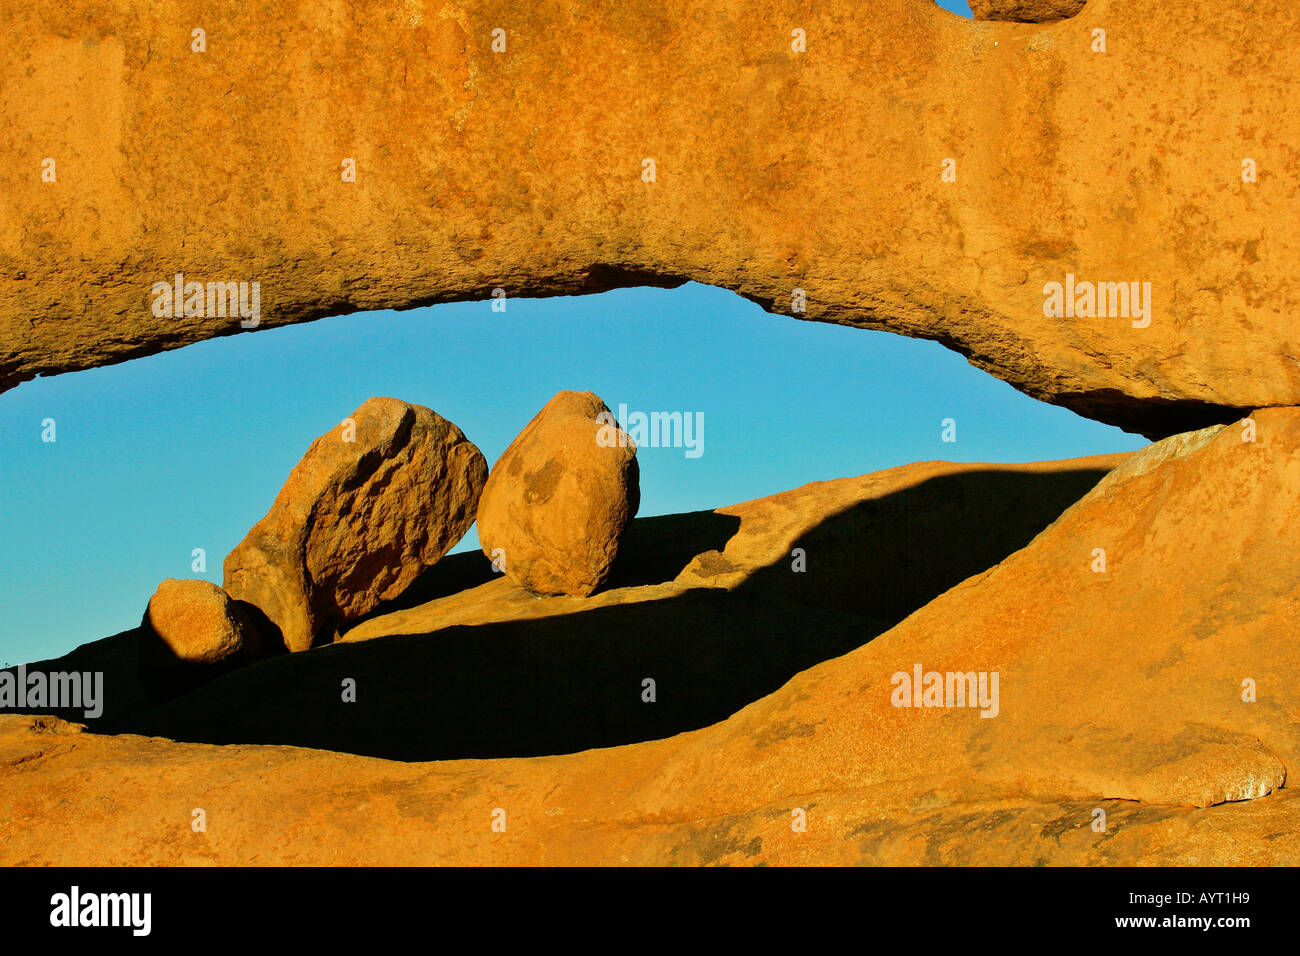 rock arch made of red granite Spitzkoppe area Namibia Africa Stock Photo